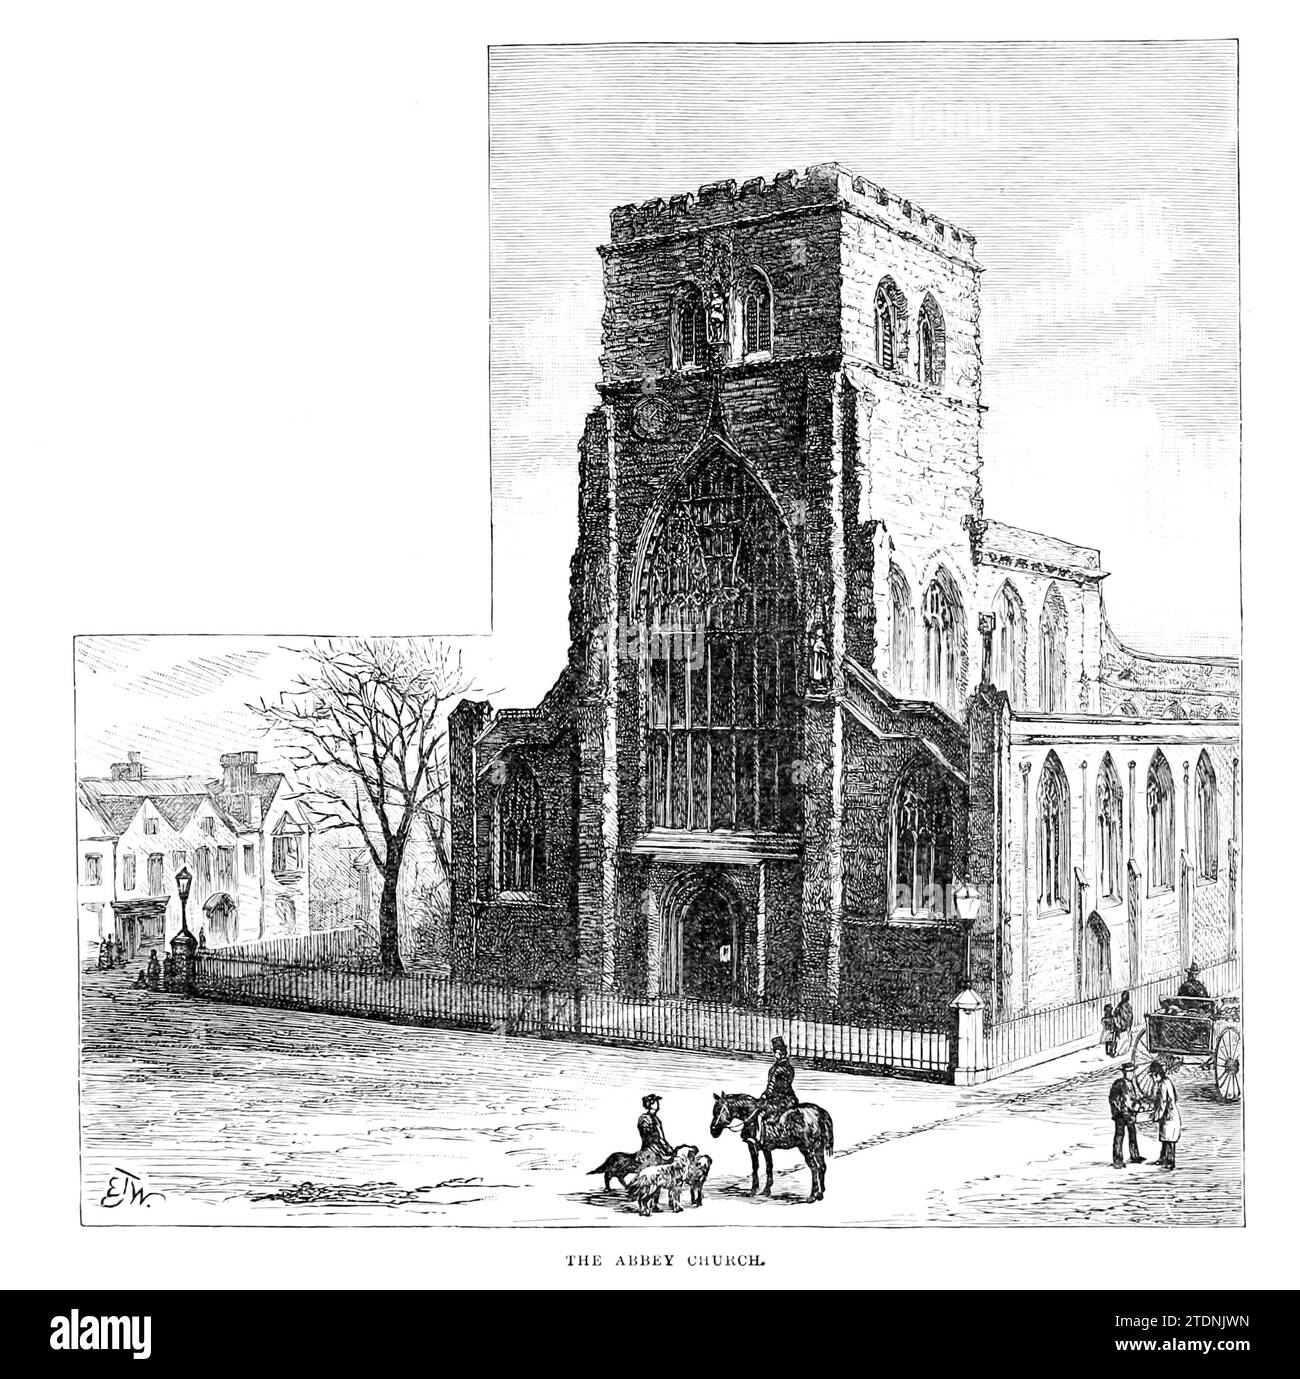 The Abbey Church, Shrewsbury from the book ' Cathedrals, abbeys and churches of England and Wales : descriptive, historical, pictorial ' Volume 2 by Bonney, T. G. (Thomas George), 1833-1923; Publisher London : Cassell 1890 Stock Photo